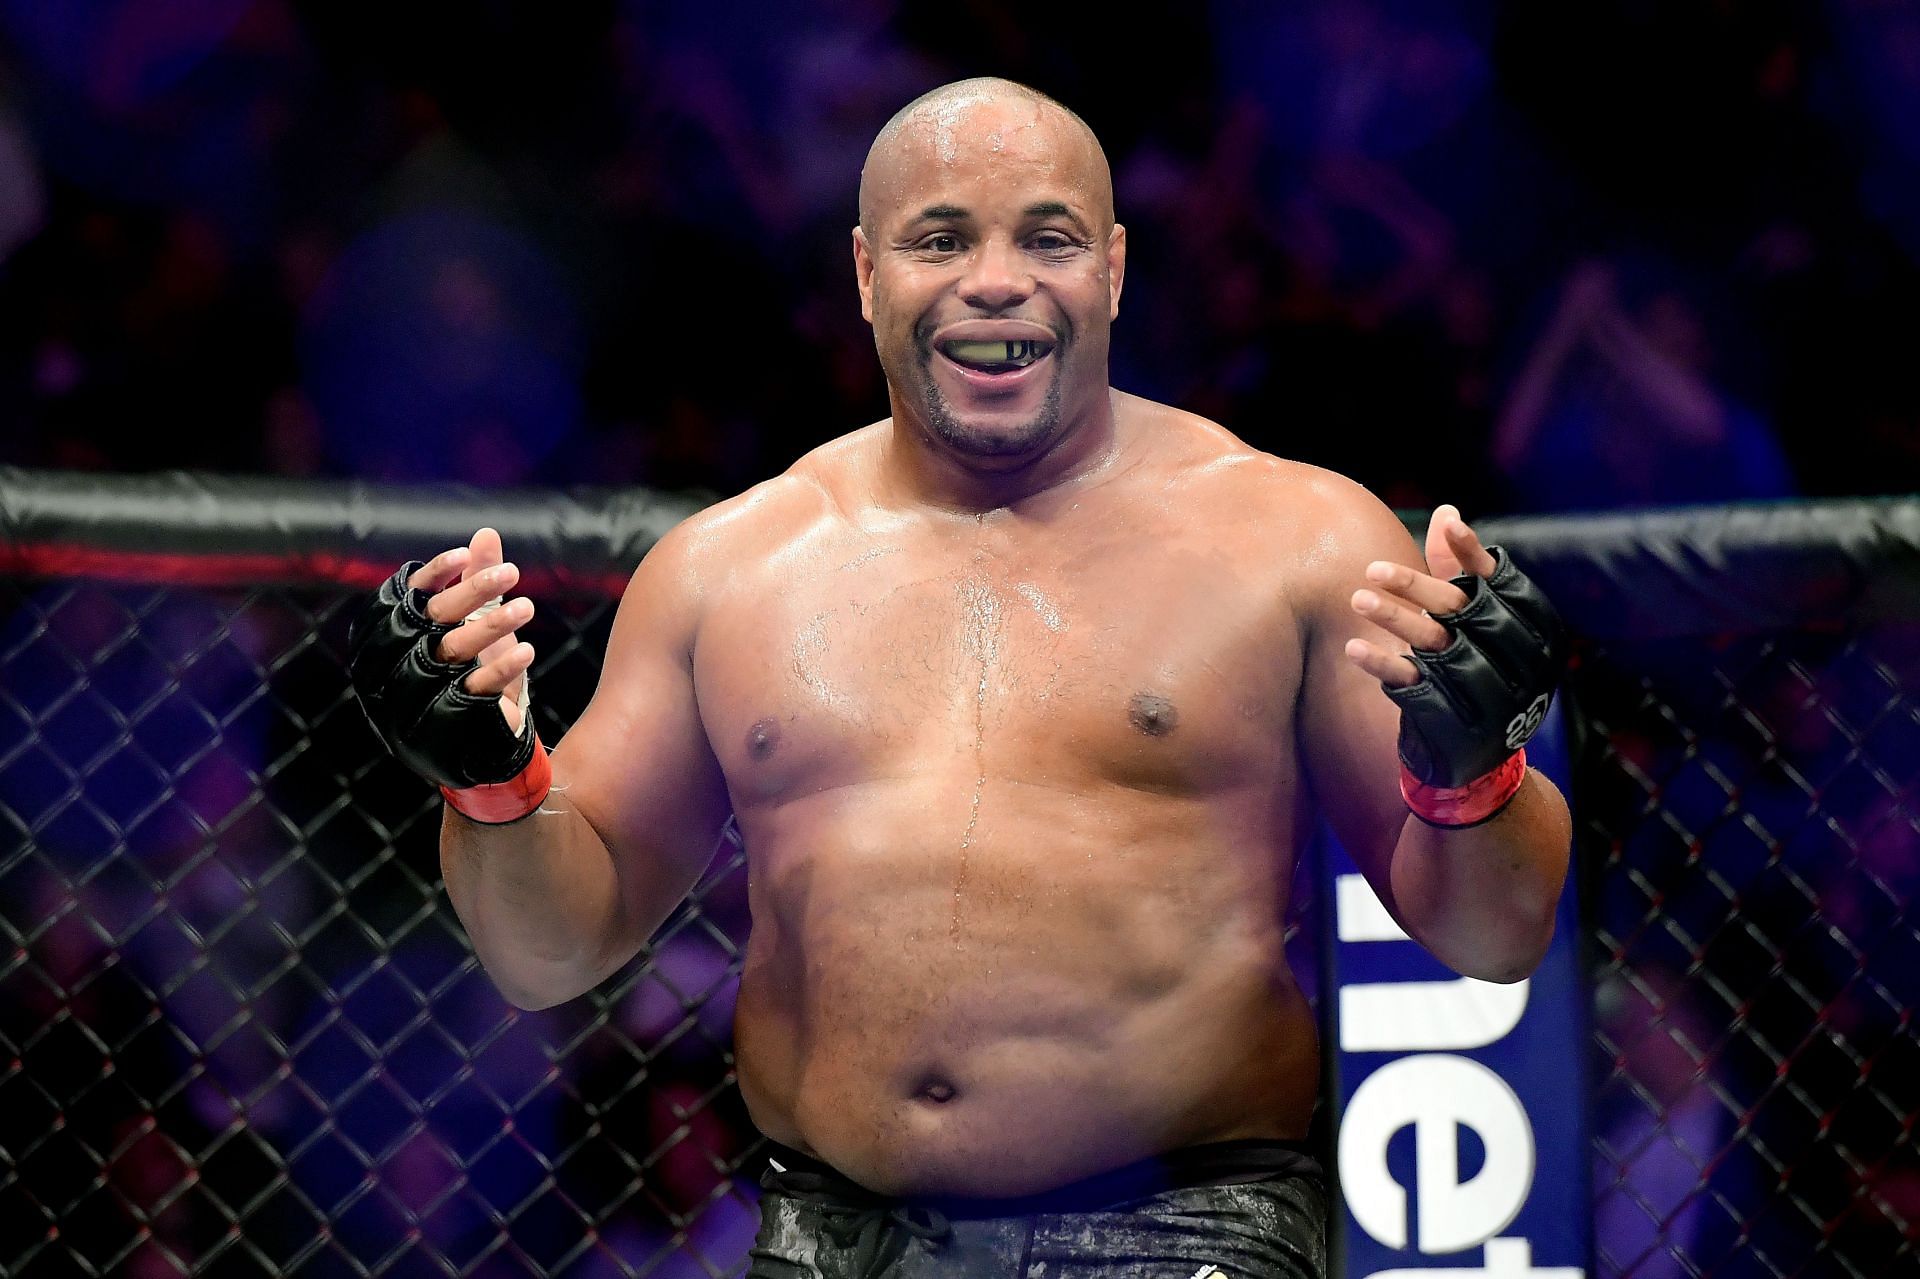 Daniel Cormier didn&#039;t look intimidating, but the UFC has seen few heavyweights with more skill in the octagon